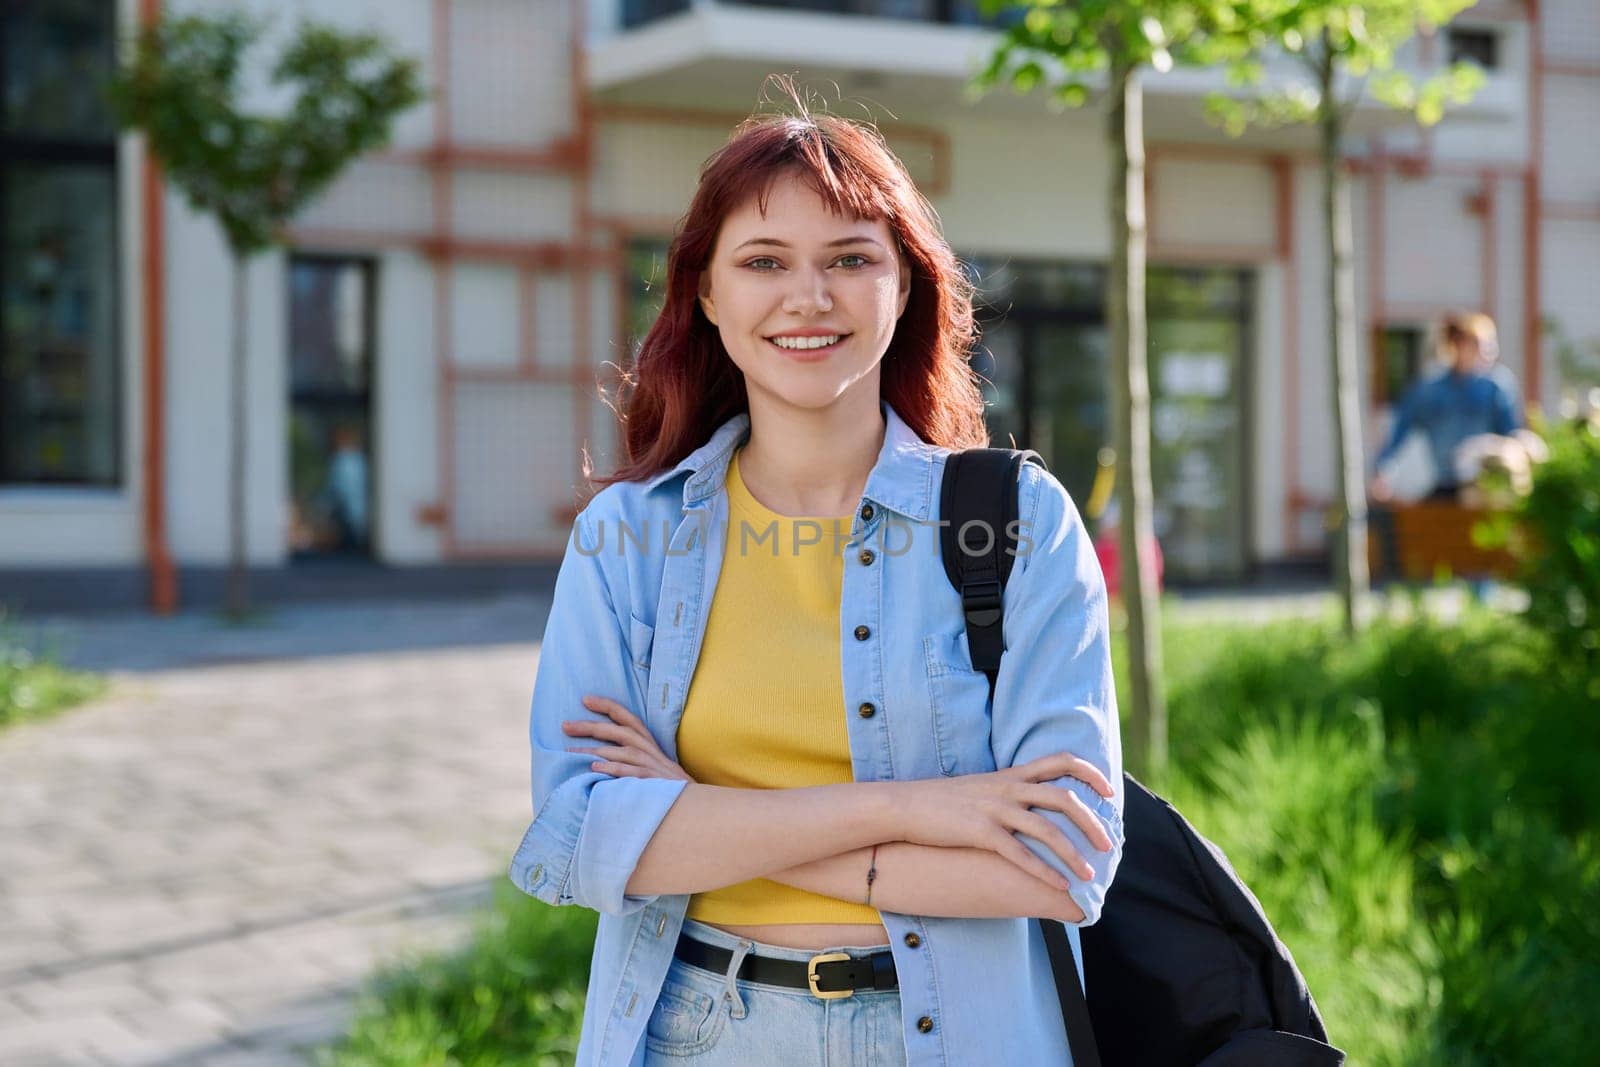 Portrait of young beautiful female college student outdoor, smiling red-haired confident girl with crossed arms backpack looking at camera, educational building background. Education training youth